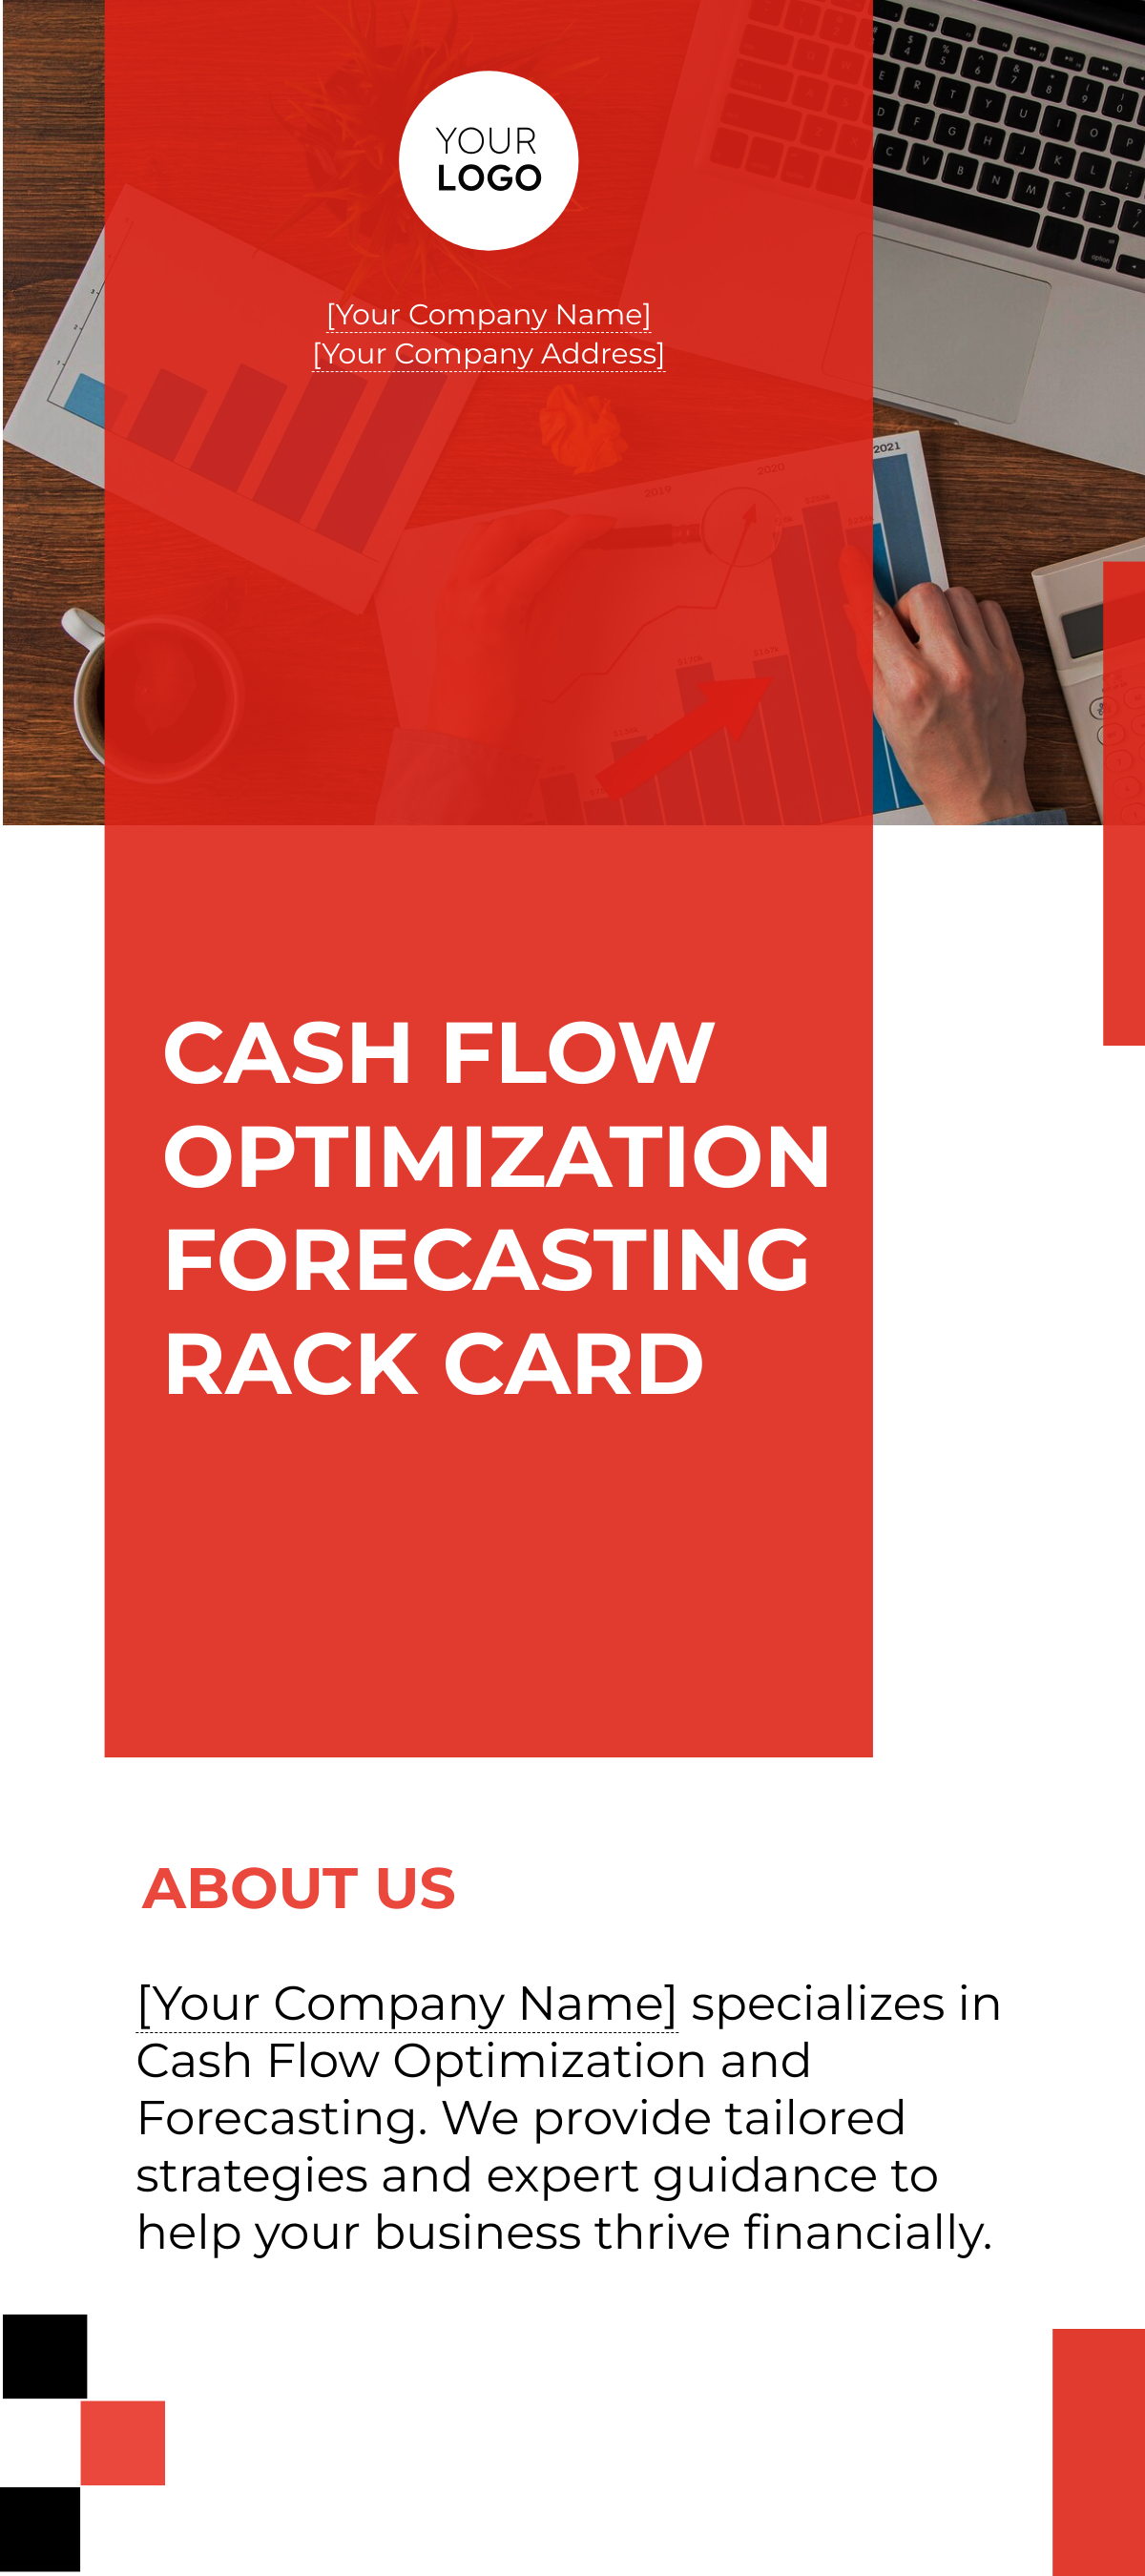 Cash Flow Optimization and Forecasting Rack Card Template